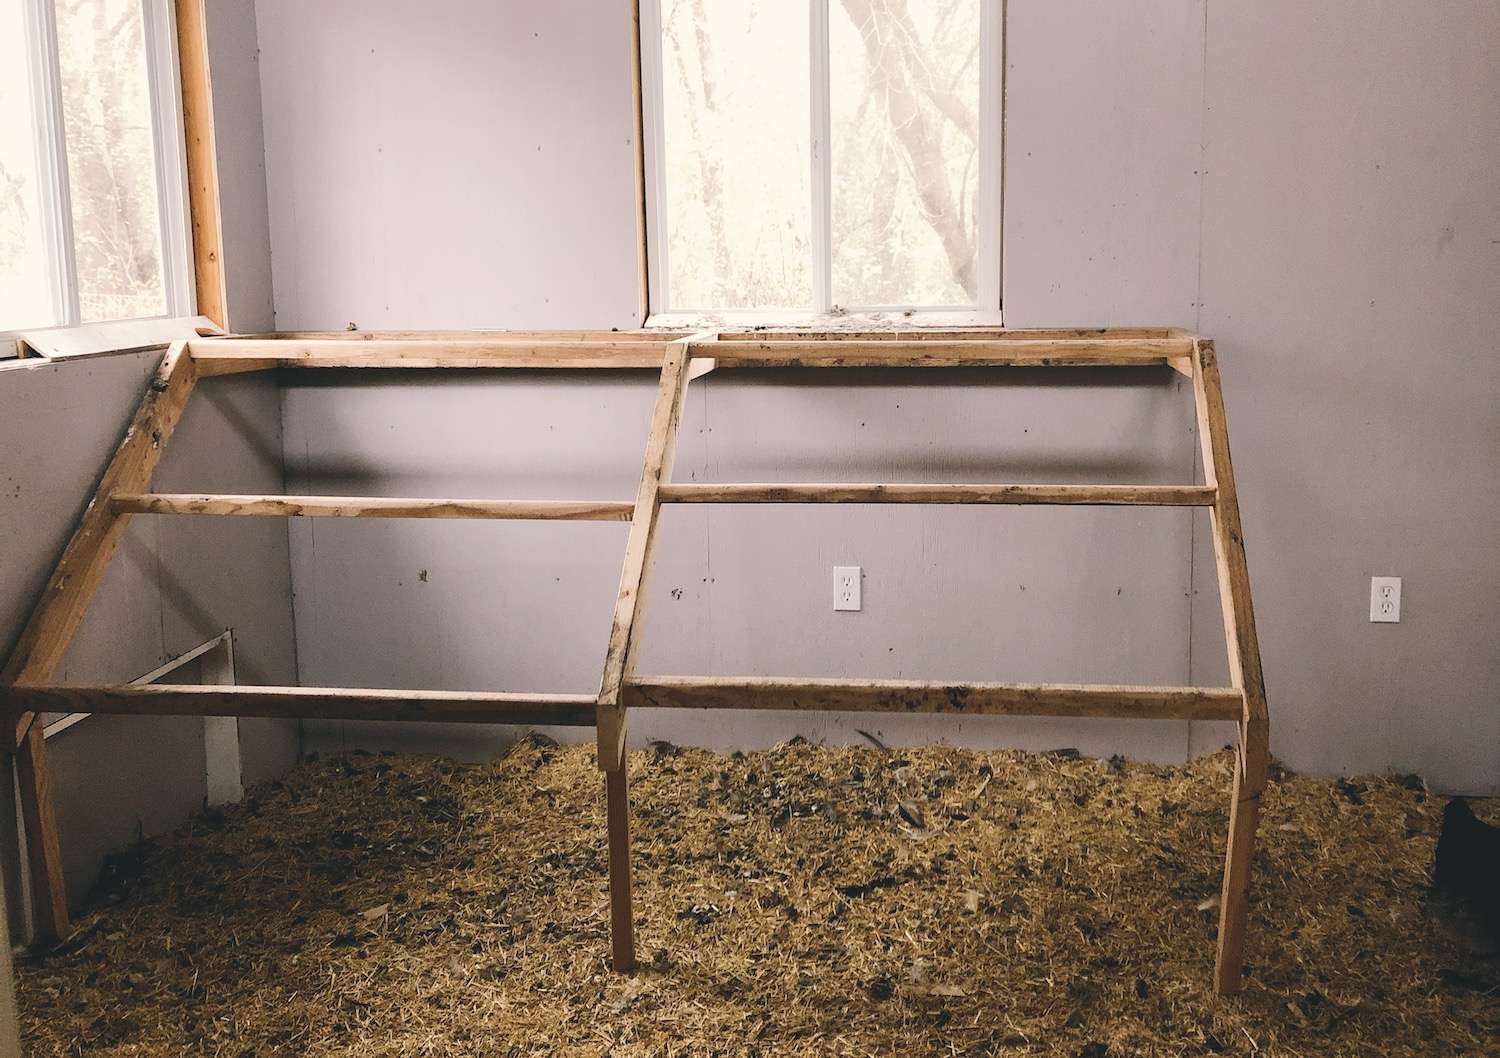 A photo of a set of roosting bars inside a chicken coop